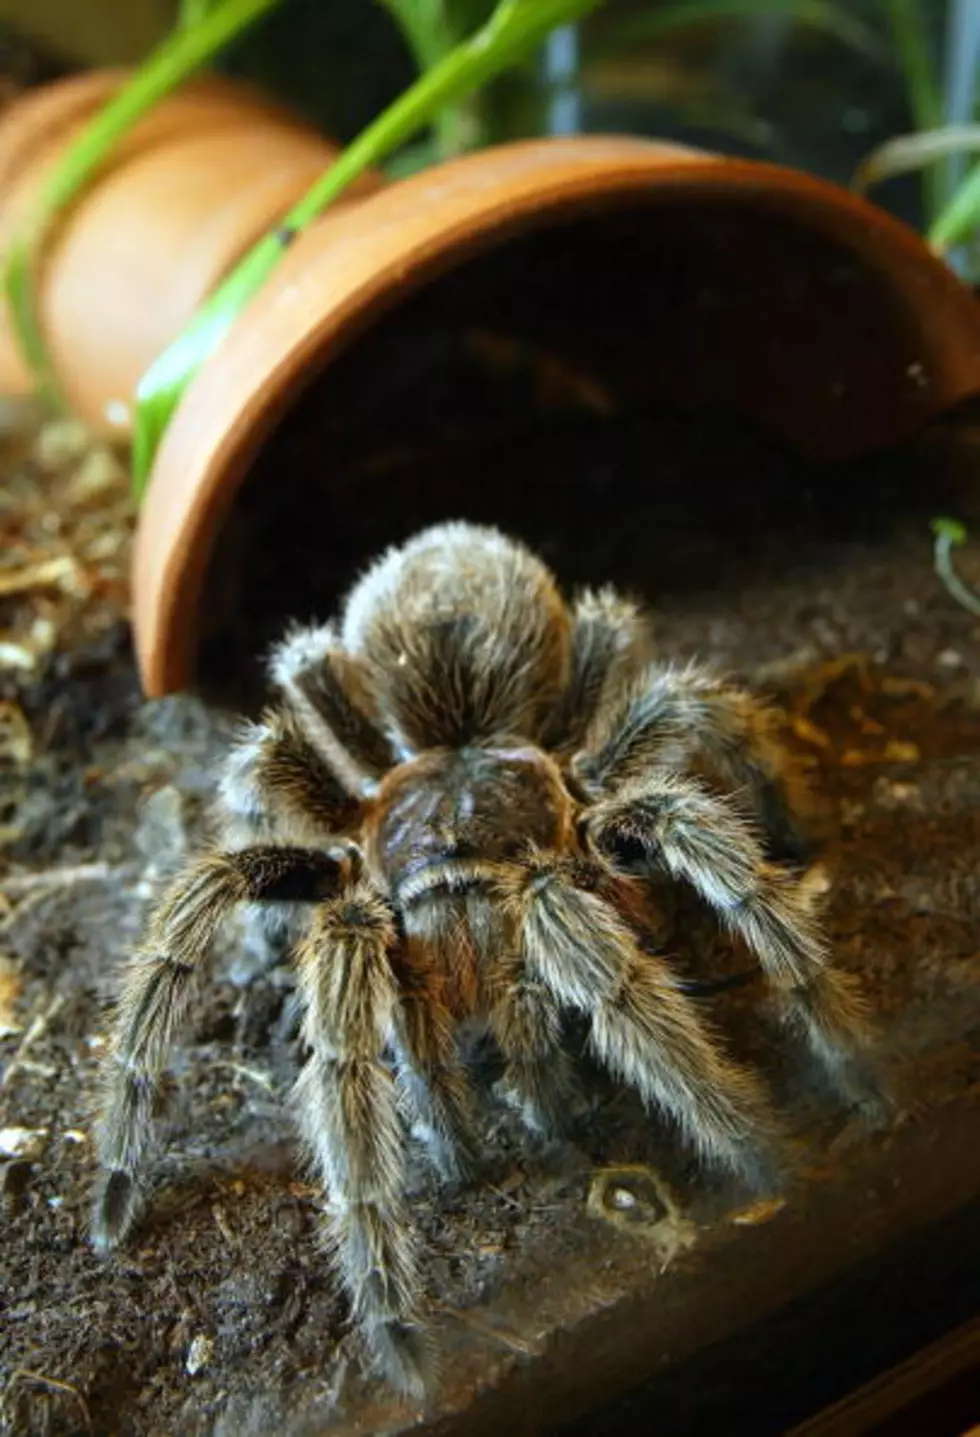 Did You Know Tarantulas Keep Frogs As Pets? [VIDEO]